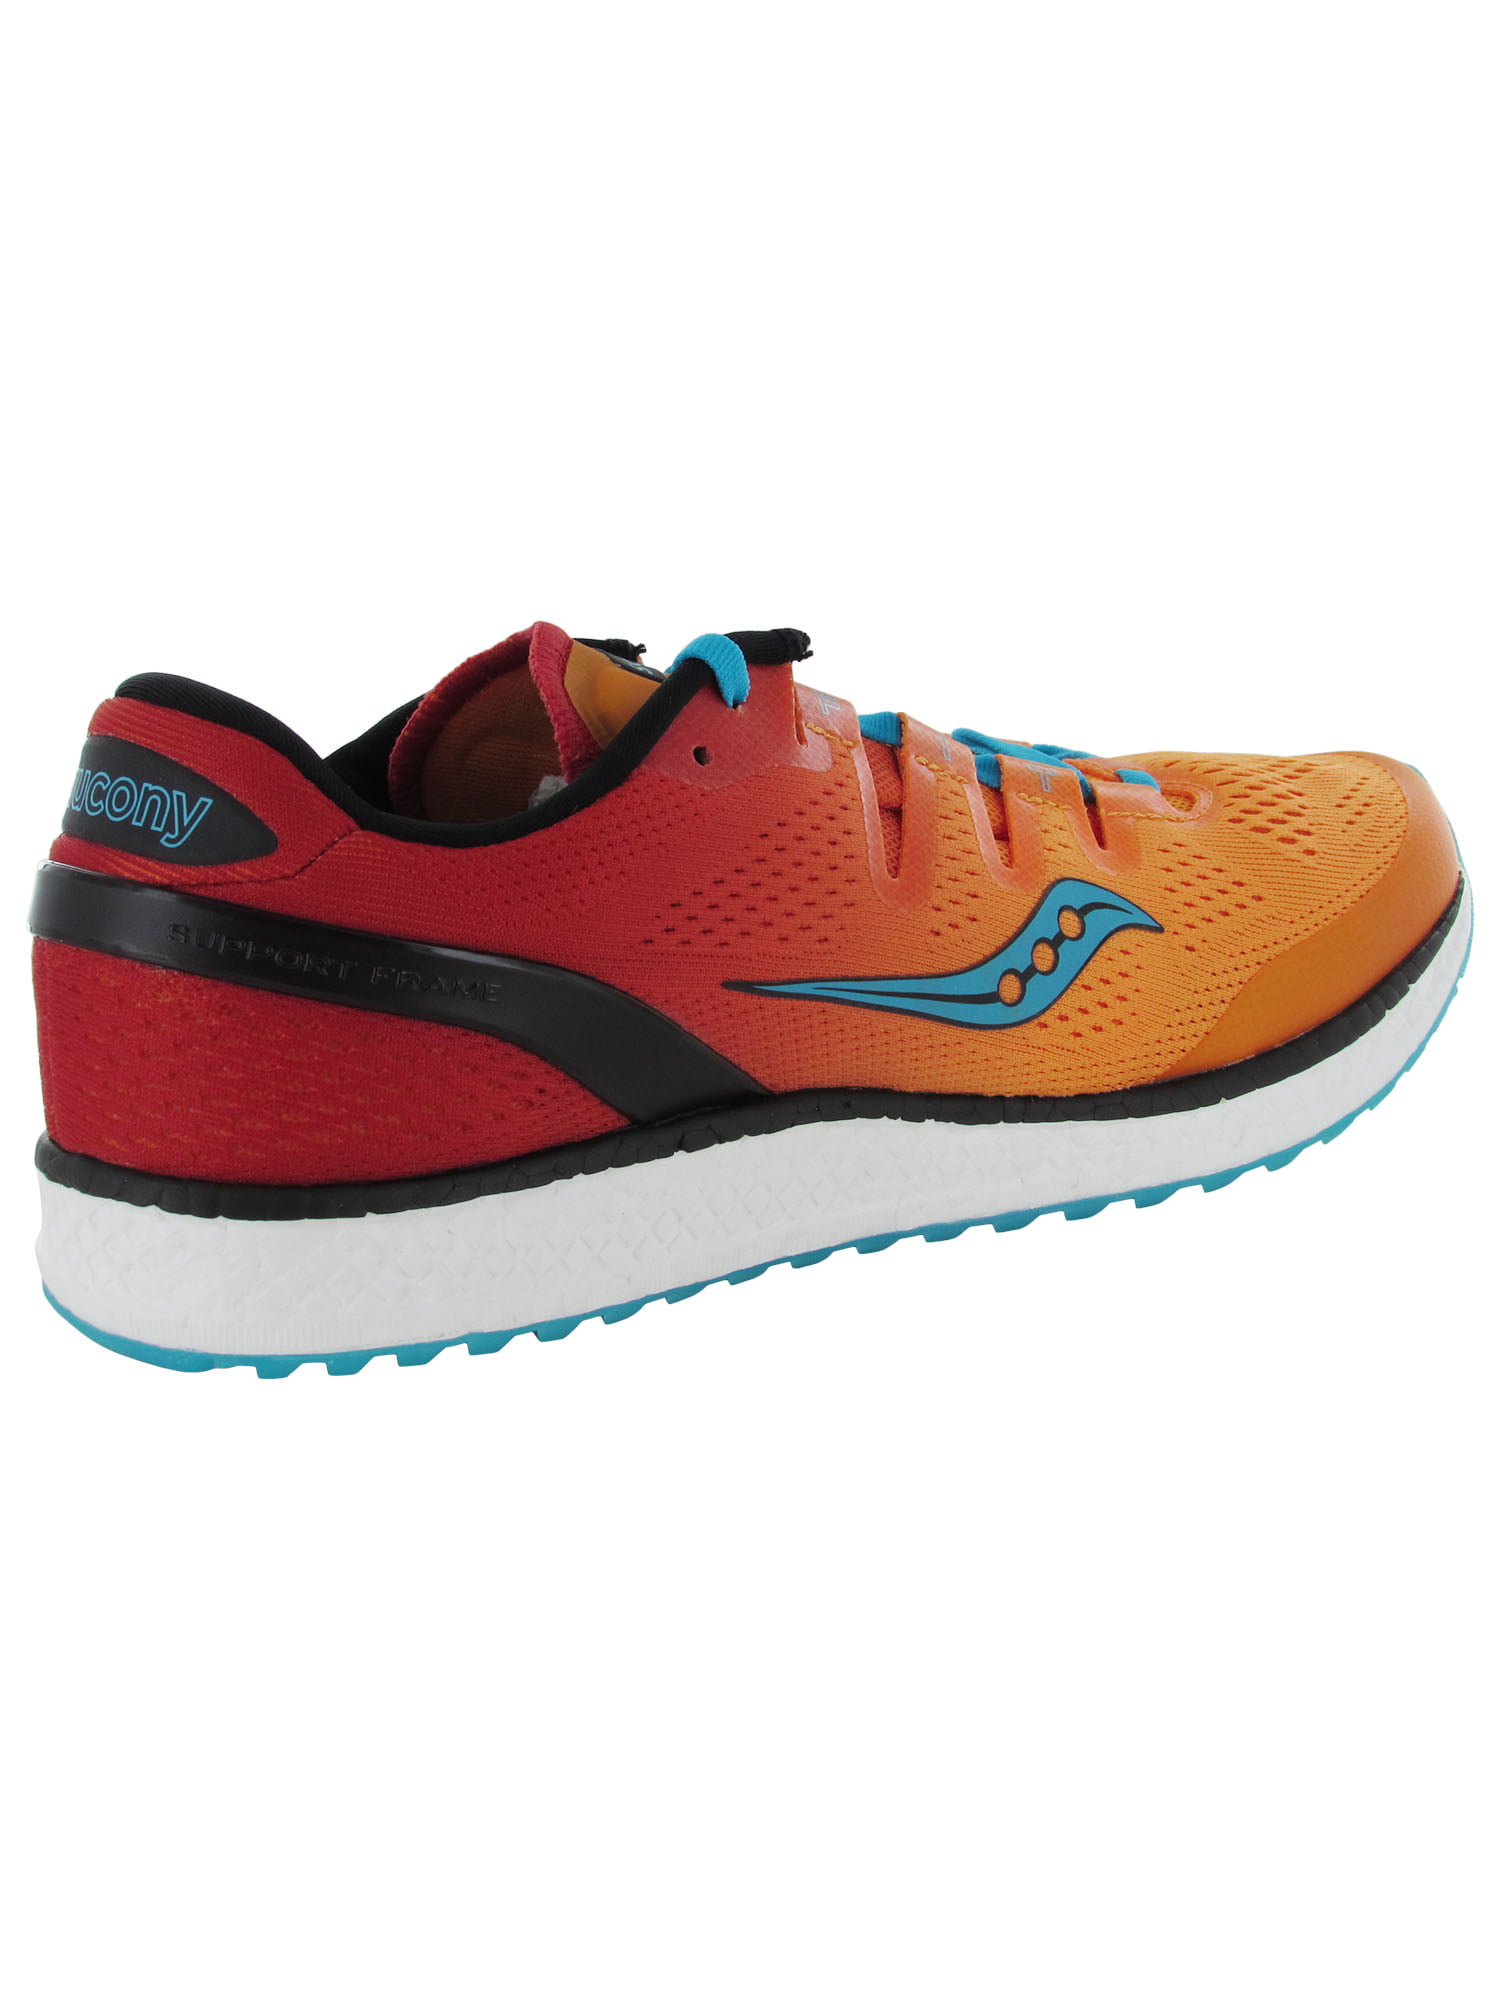 saucony freedom iso orange red teal